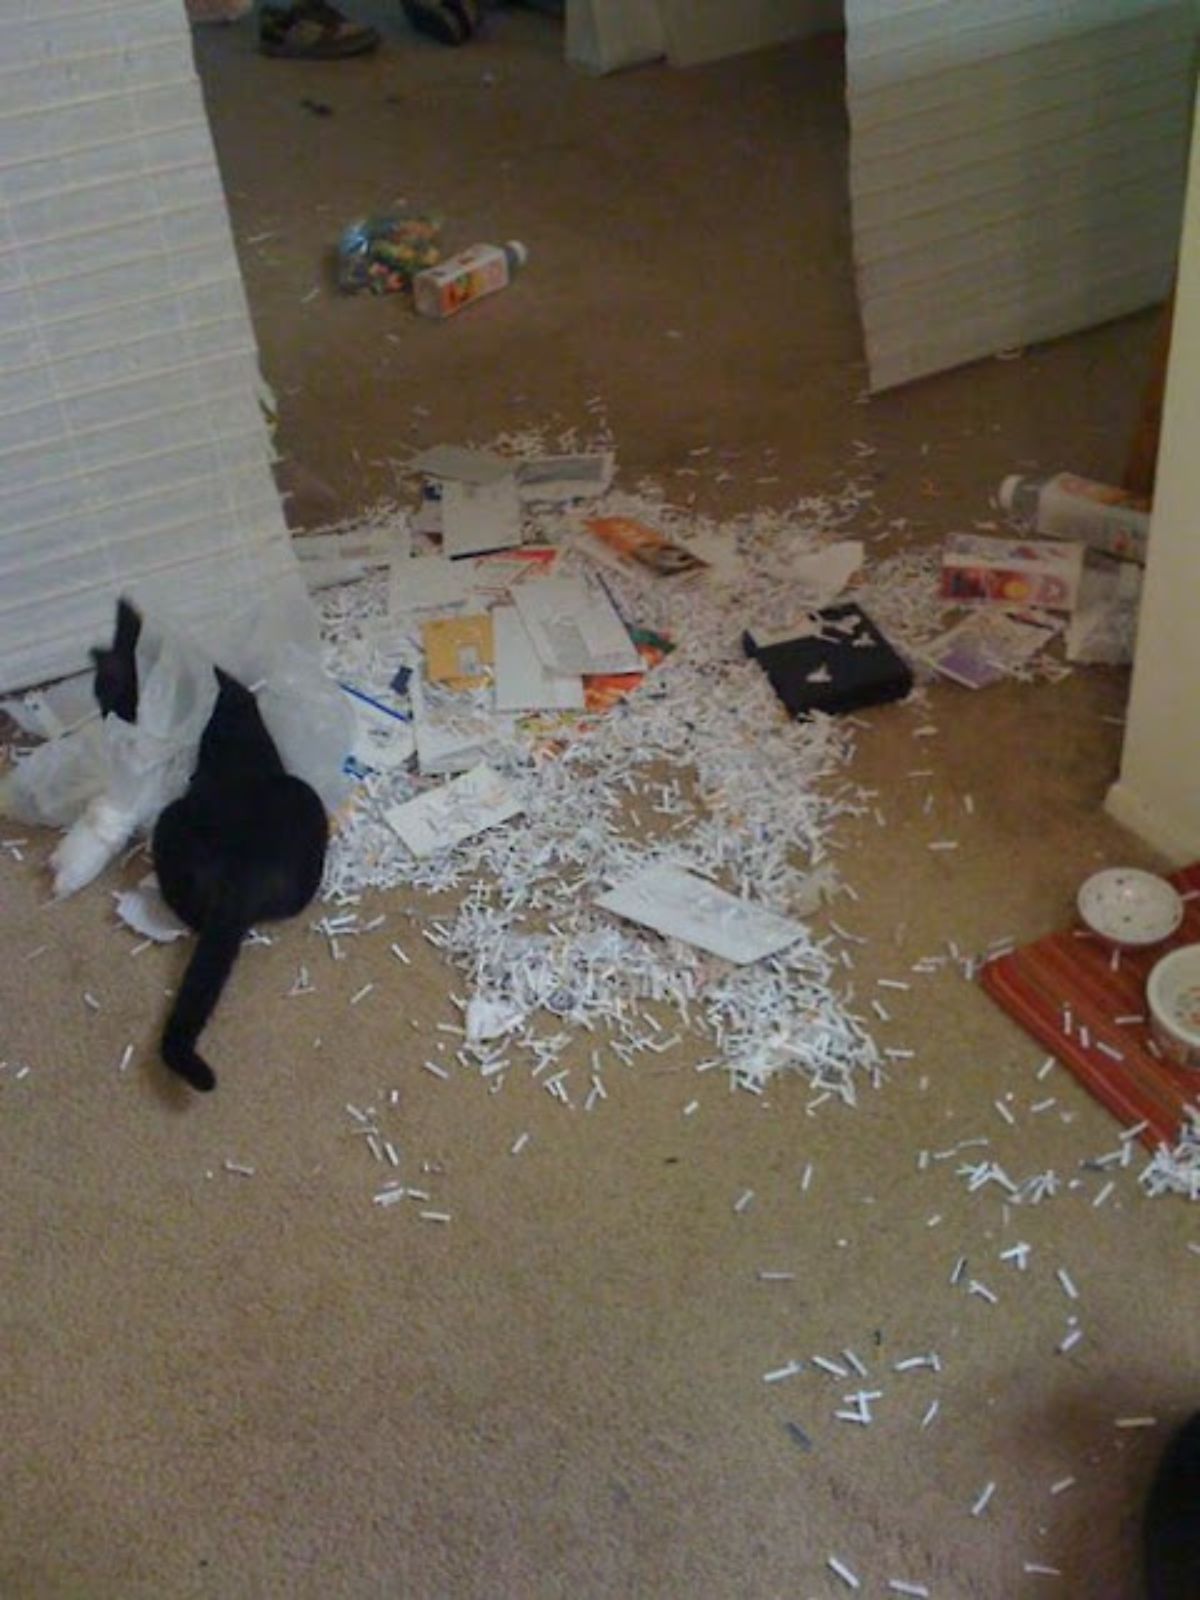 black cat with ripped up mail and food and drink packs on the floor